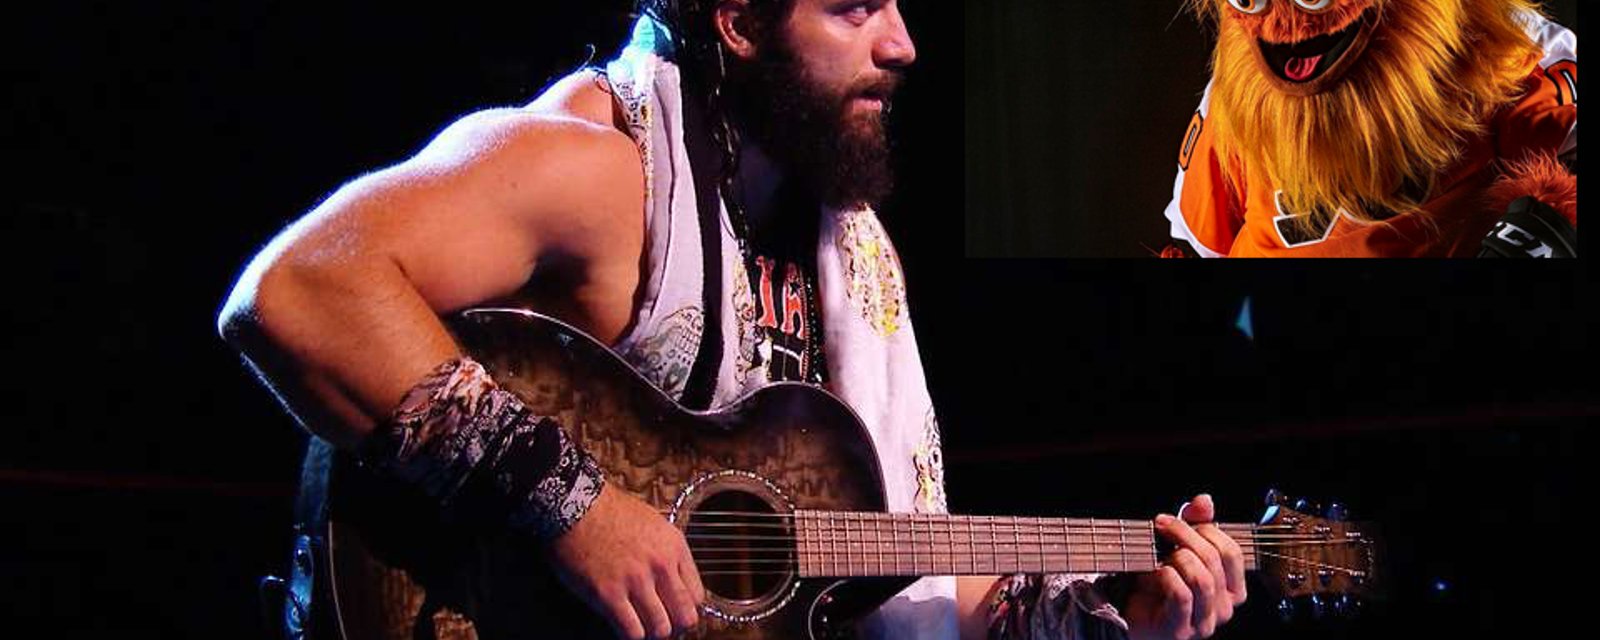 WWE superstar Elias rips Gritty and Philly fans live on Raw!